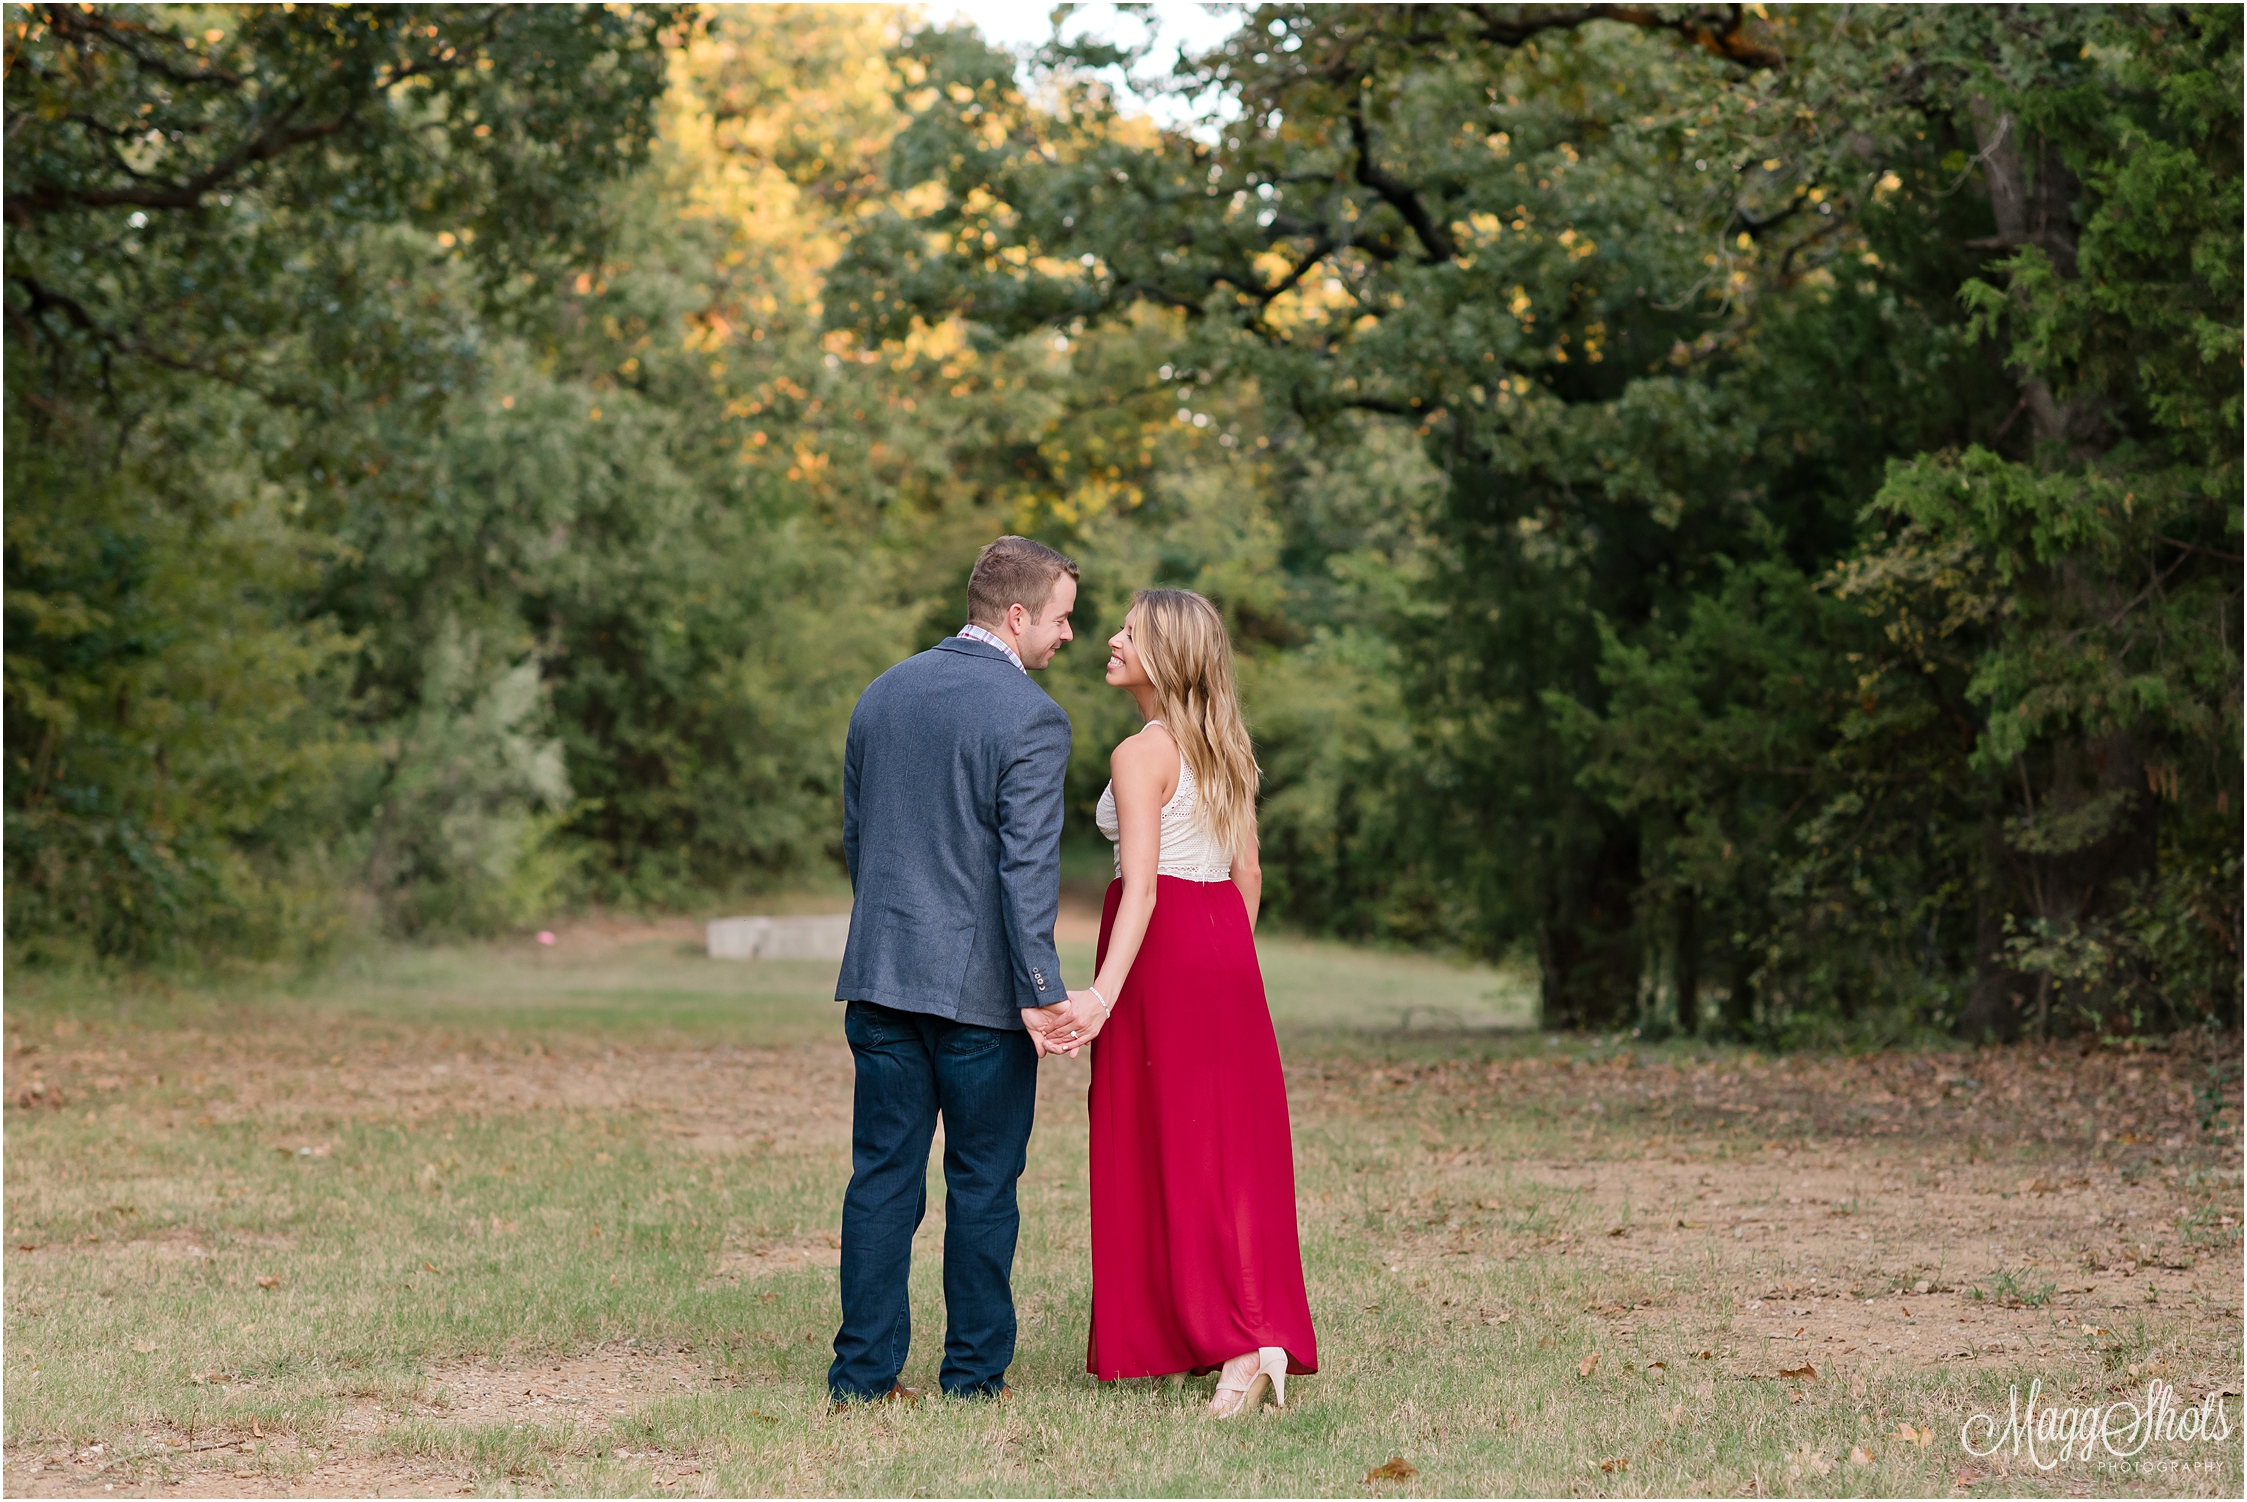 Flower Mound, Taylor and Tant, Love Engagement Session, Engagement, Park, Wedding Photographer, Professional Photographer, DFW Wedding Photographer, MaggShots, MaggShots Photography, Destination Wedding Photographer, Destination Photographer